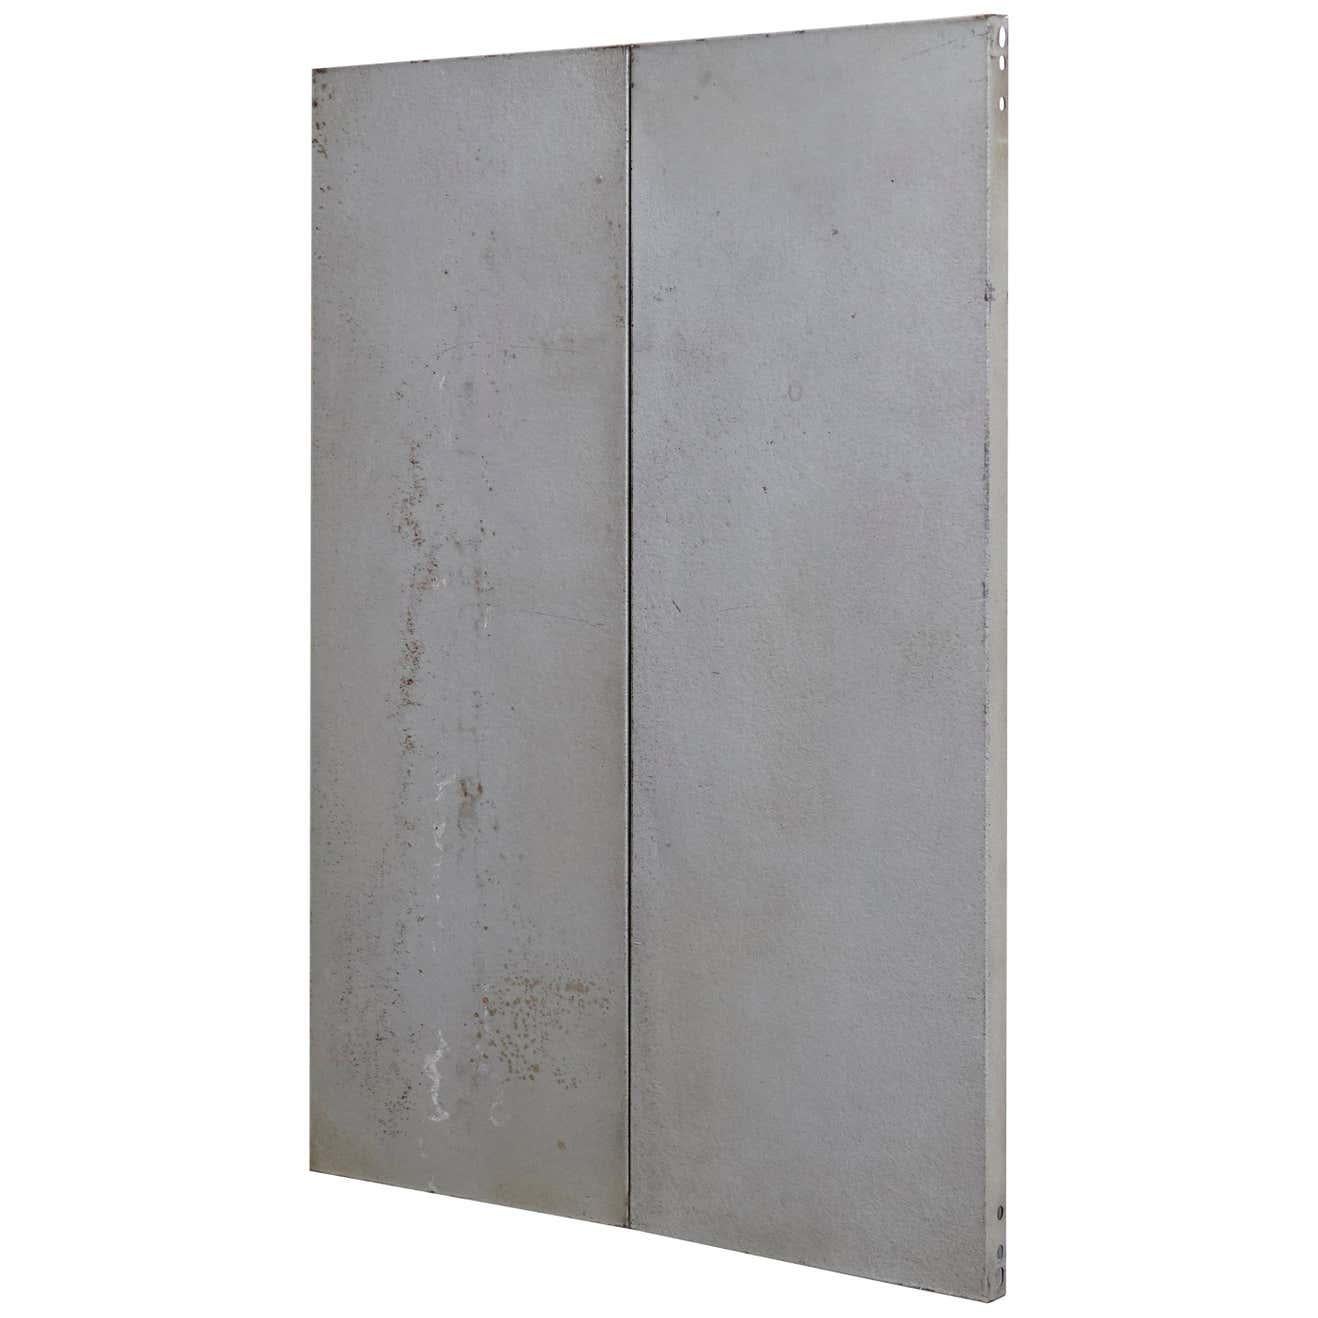 Ramon Horts Contemporary Metal Abstract Minimalist Artwork 1/2 N 003 For Sale 9